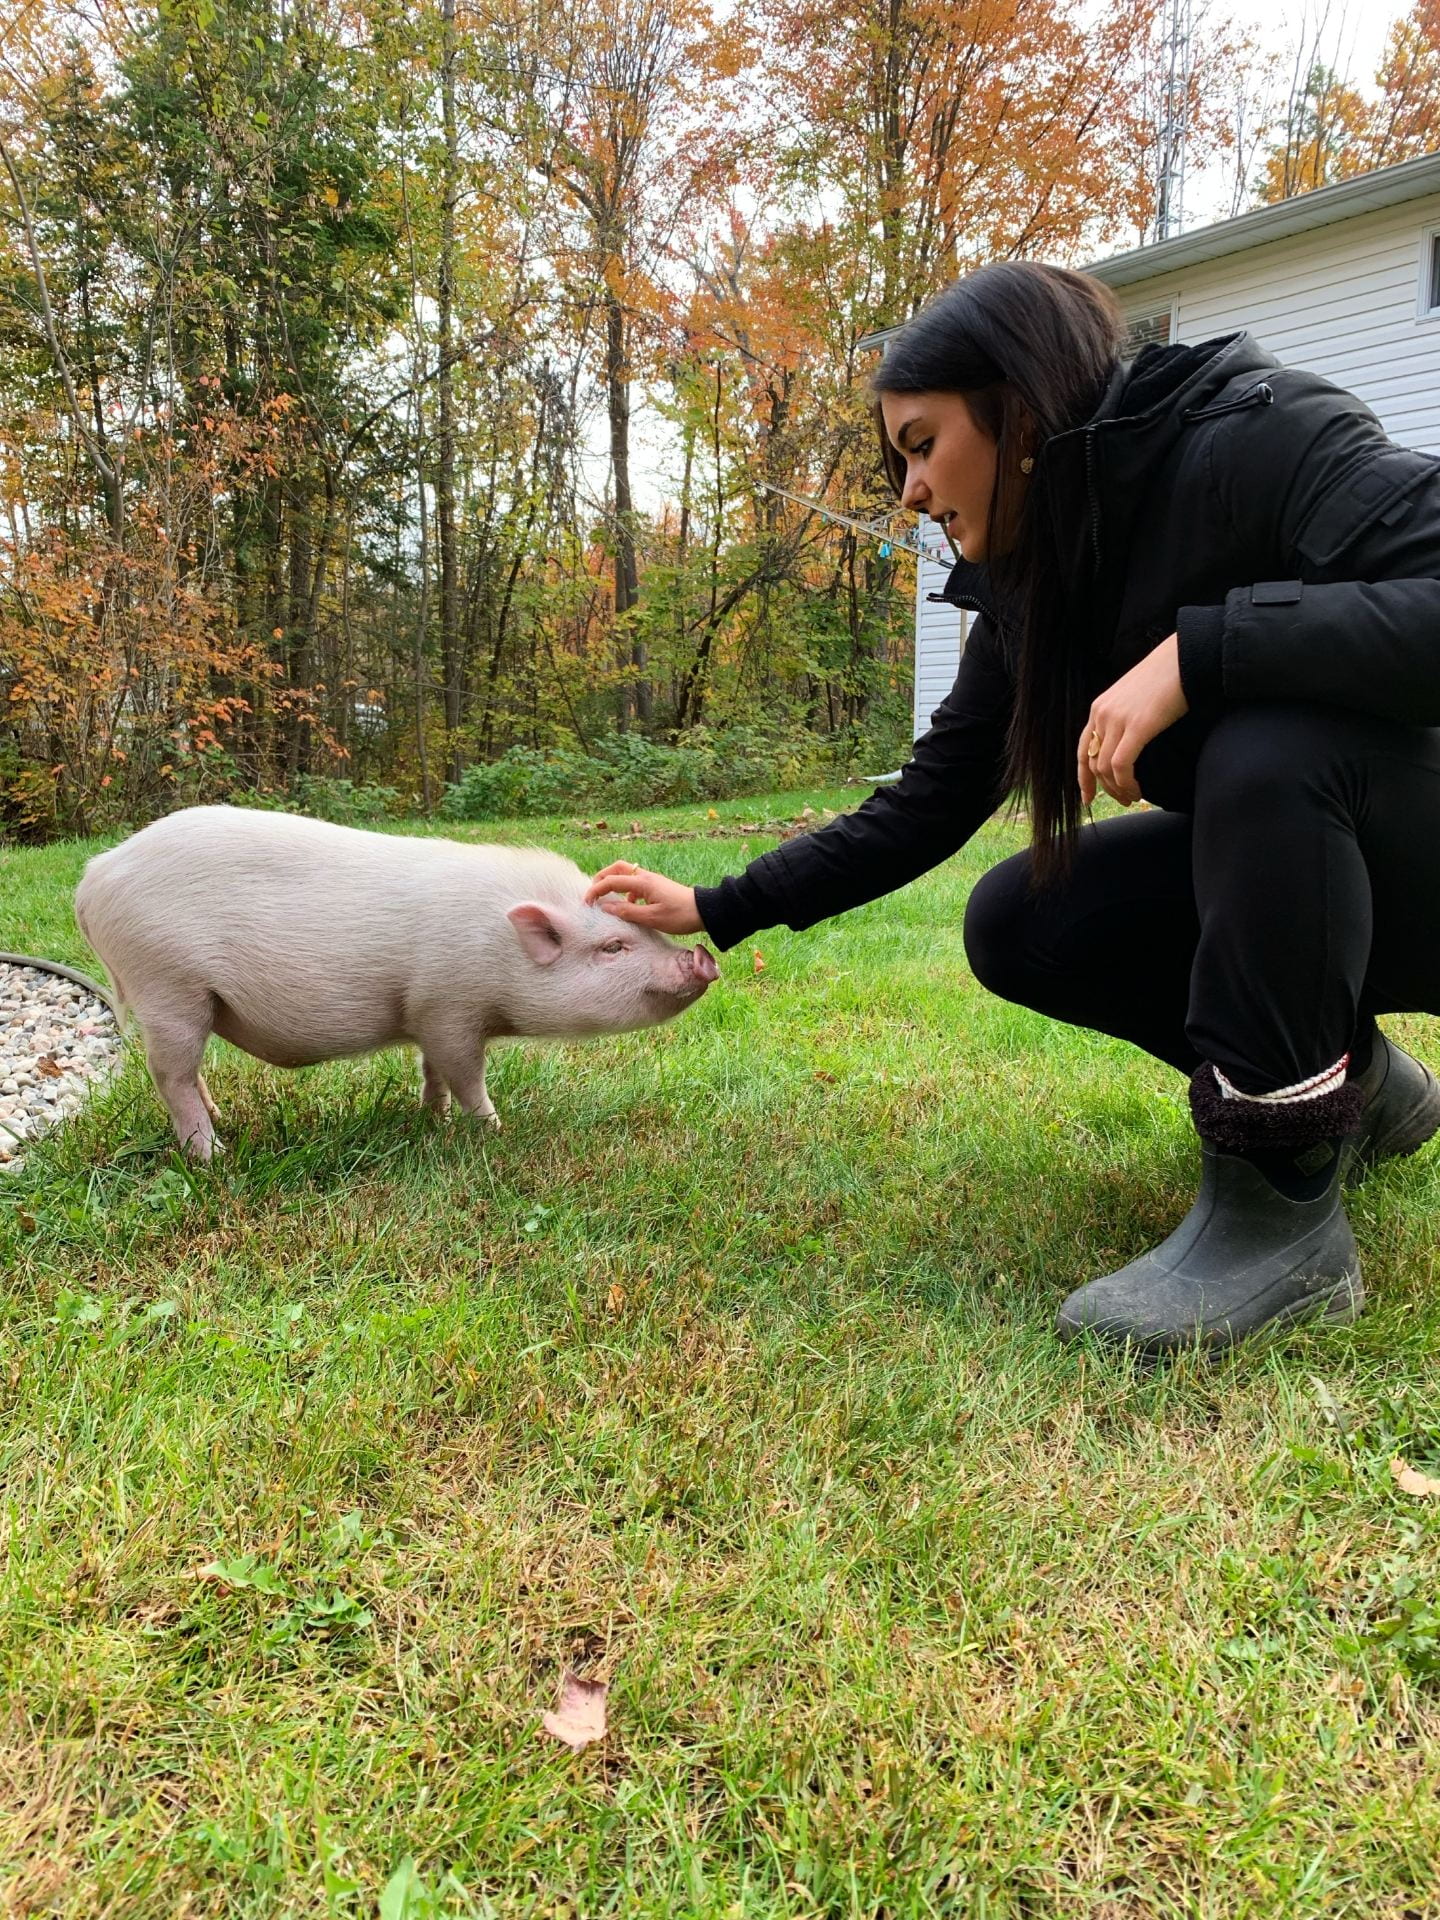 Abby pats her pet pig, Wilson, on the grass during an autumn day.